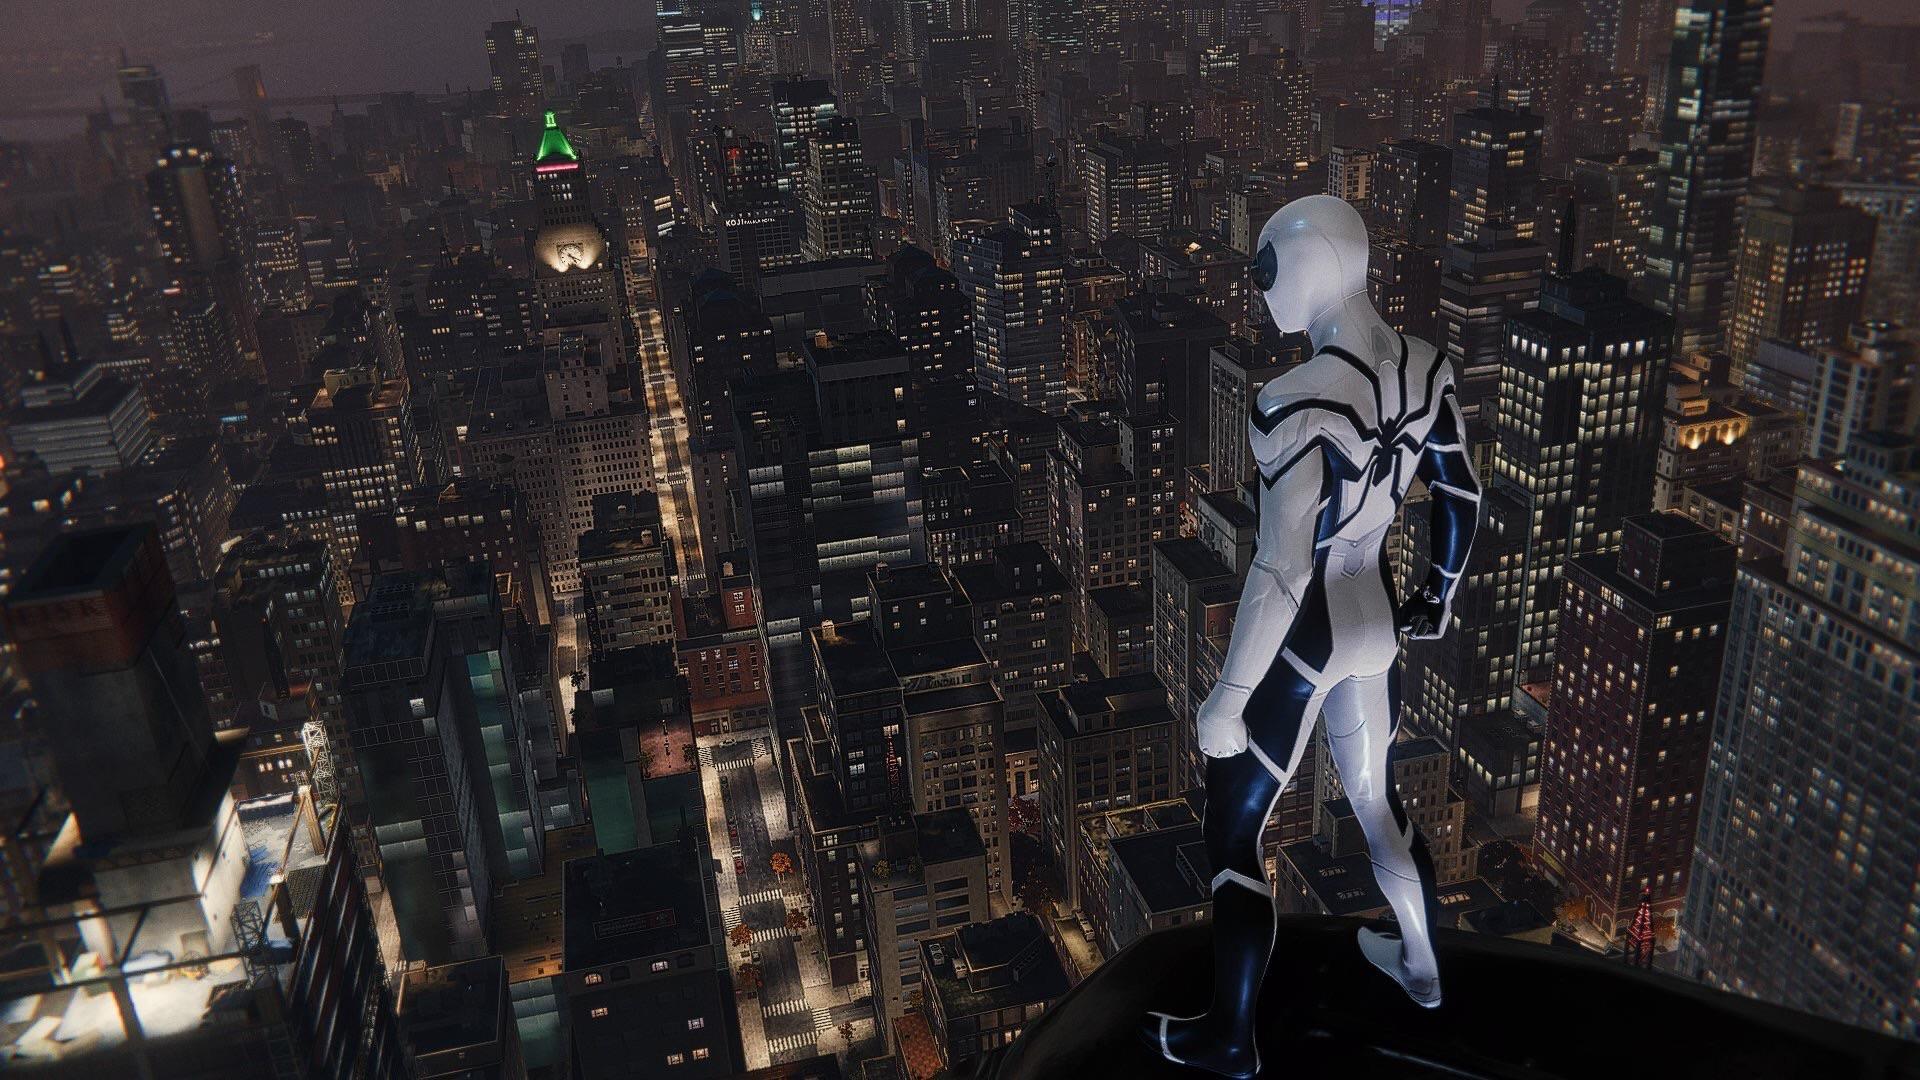 Love the Future Foundation suit in this game : Spiderman.